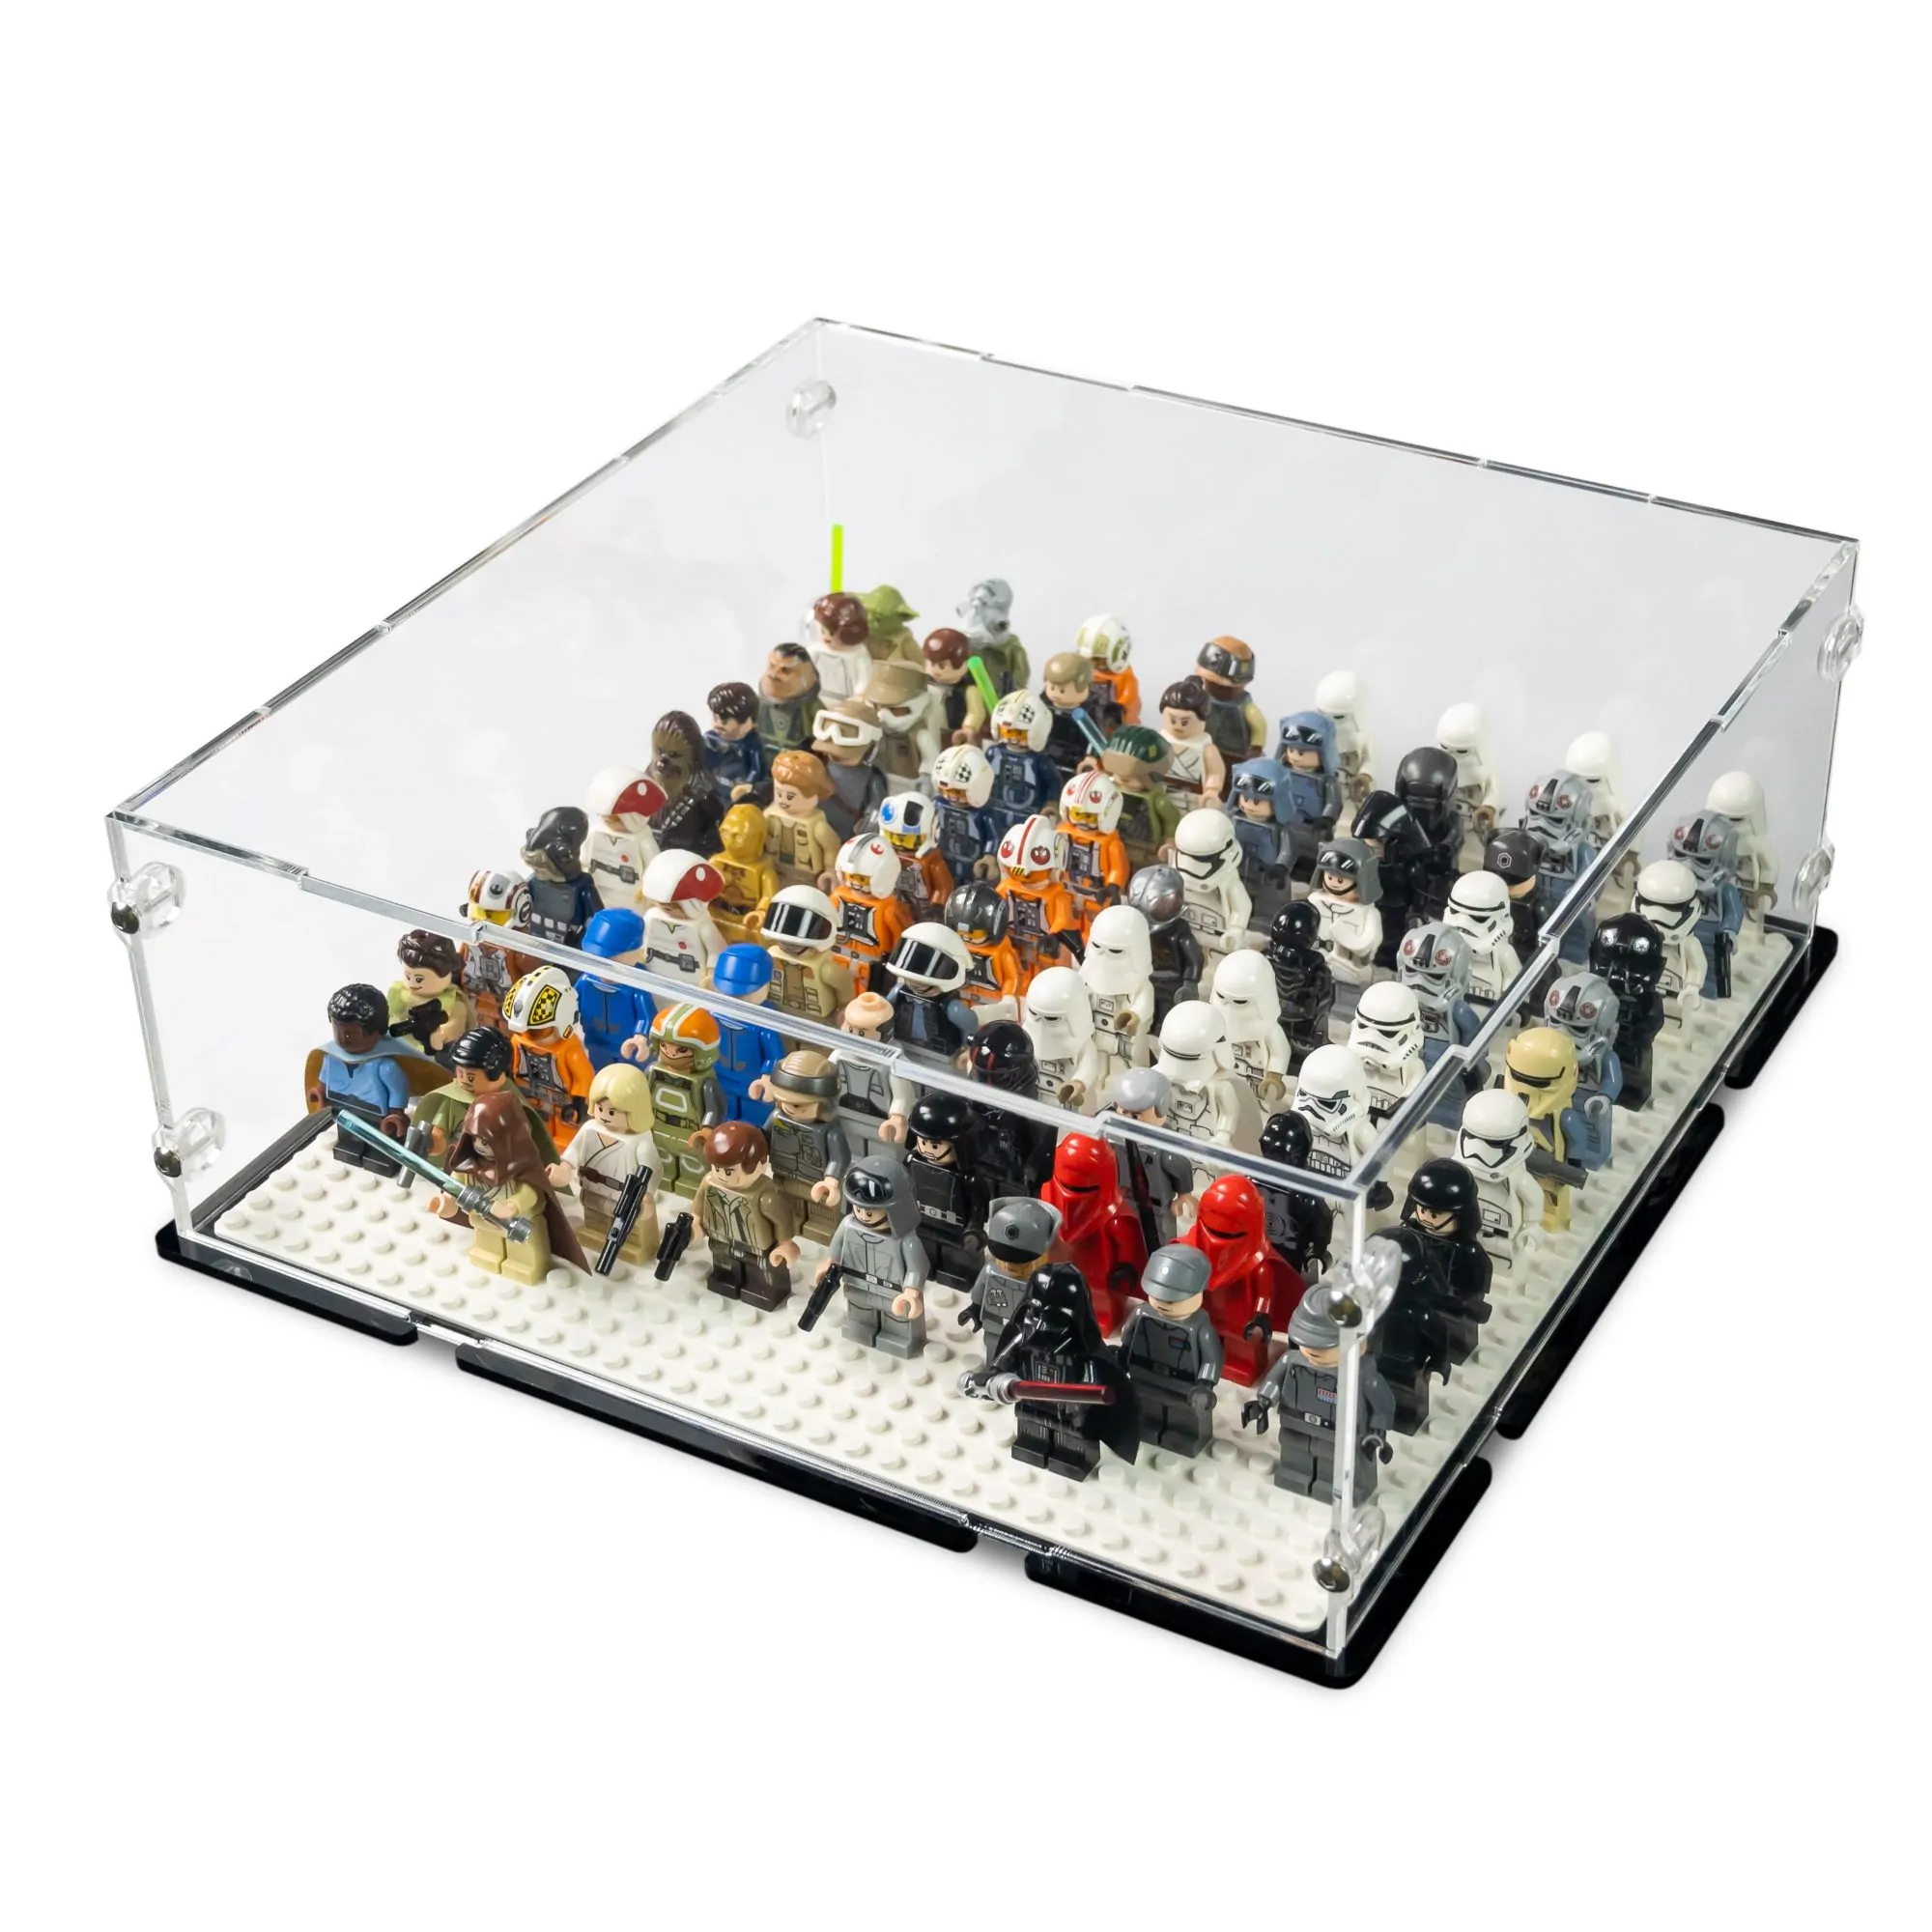 Acrylic Display Case for LEGO Minifigure Army